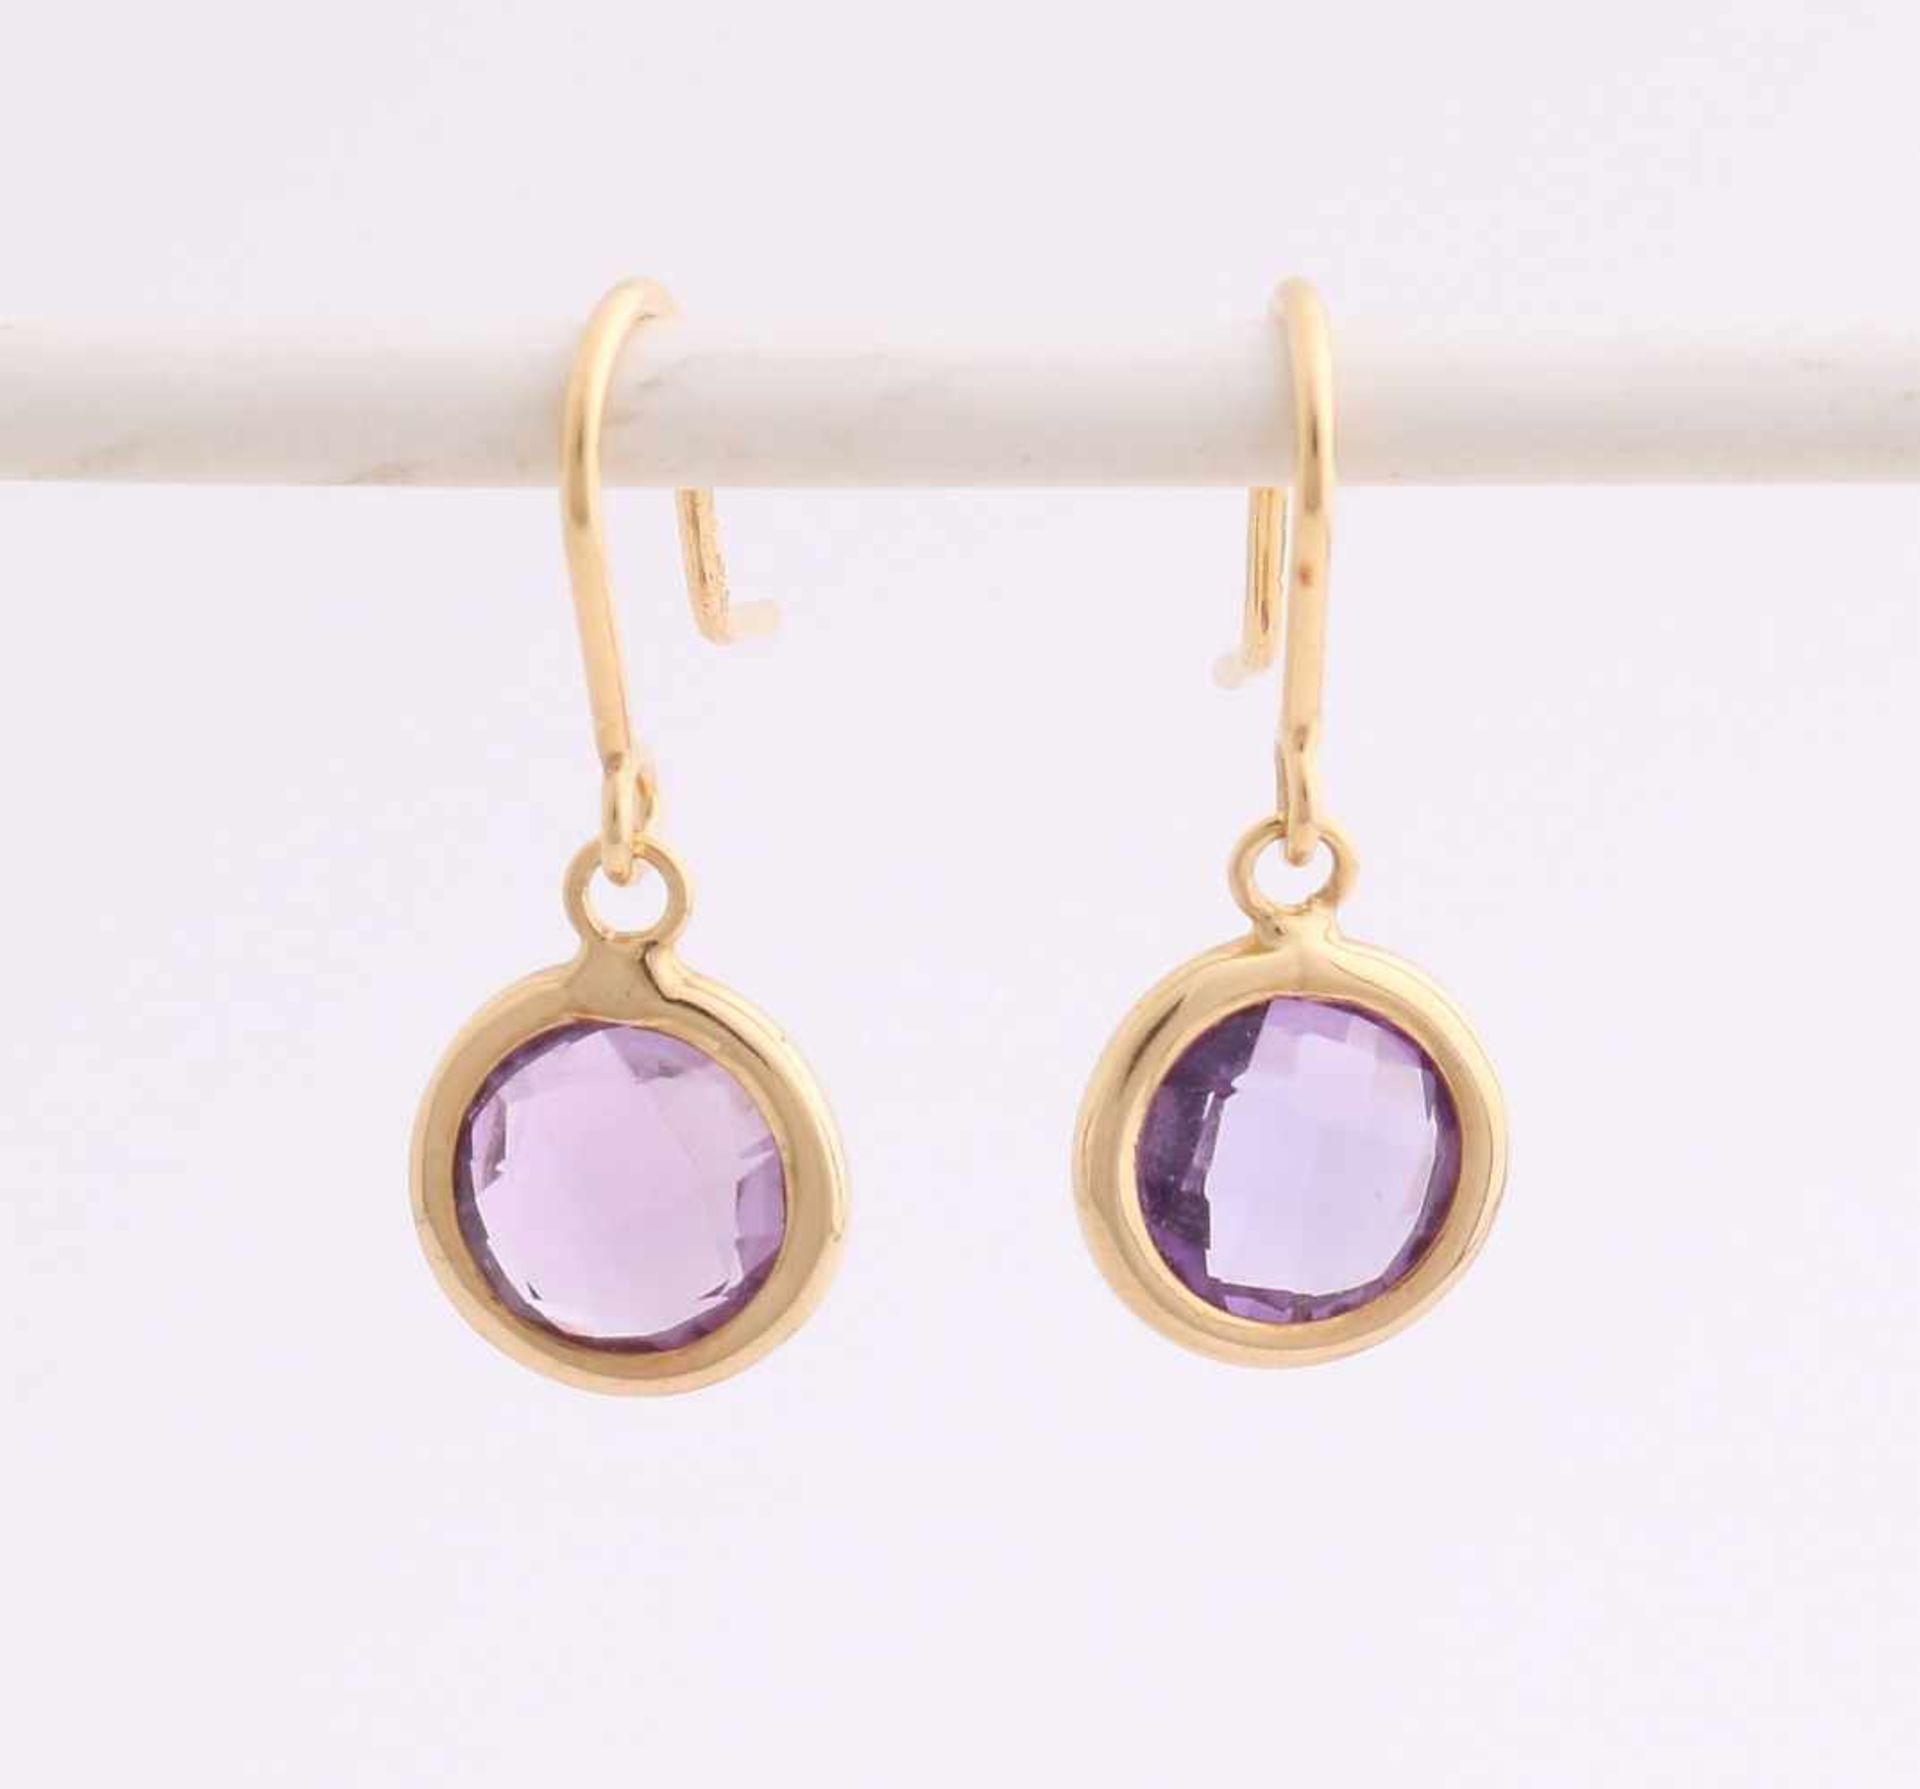 Yellow gold earrings, 750/000, with amethyst. Yellow gold ear hooks having thereon a circular